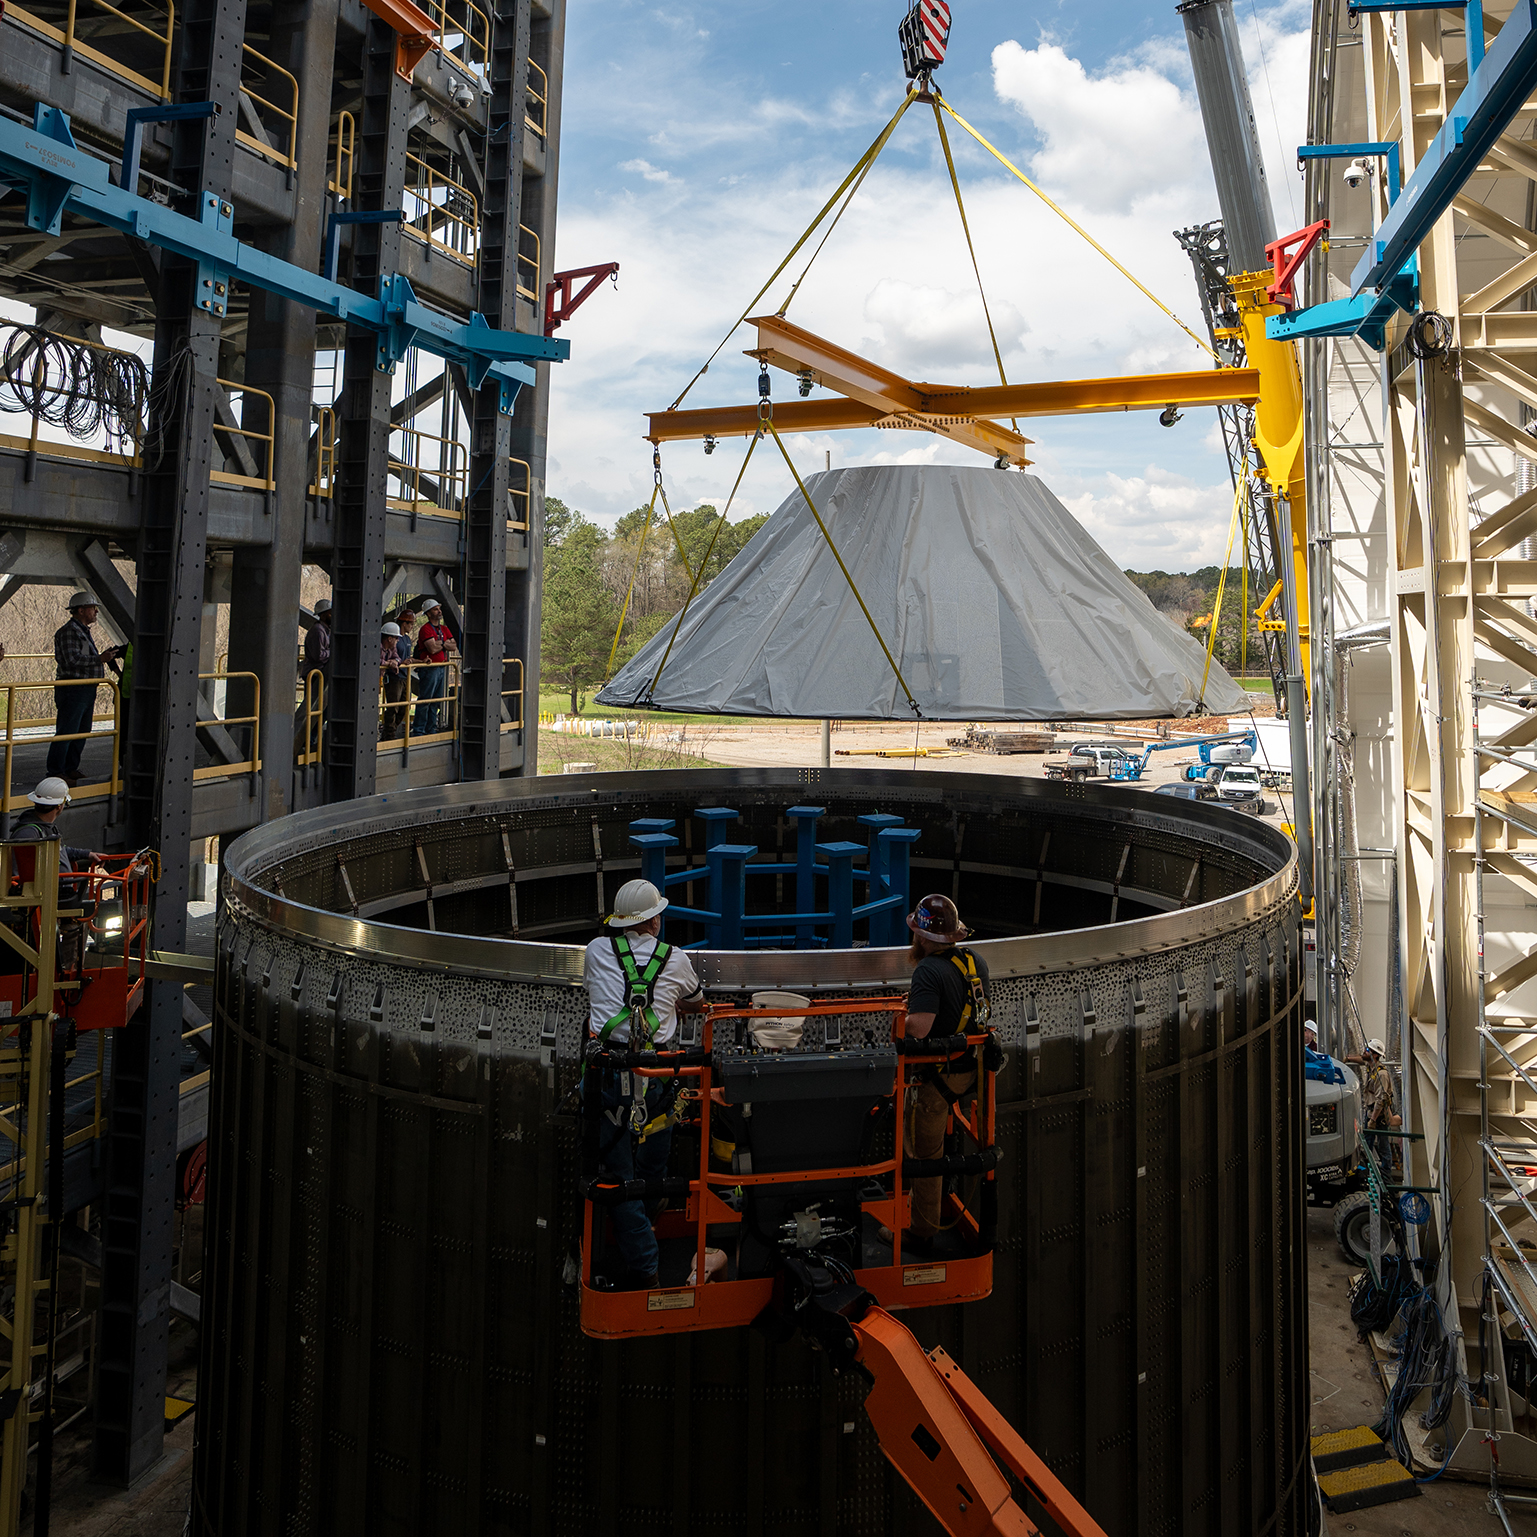 Teams at Marshall manufactured, prepared, and move the payload adapter test article. The payload adapter will undergo testing in the same test stand that once housed the SLS liquid oxygen tank structural test article.